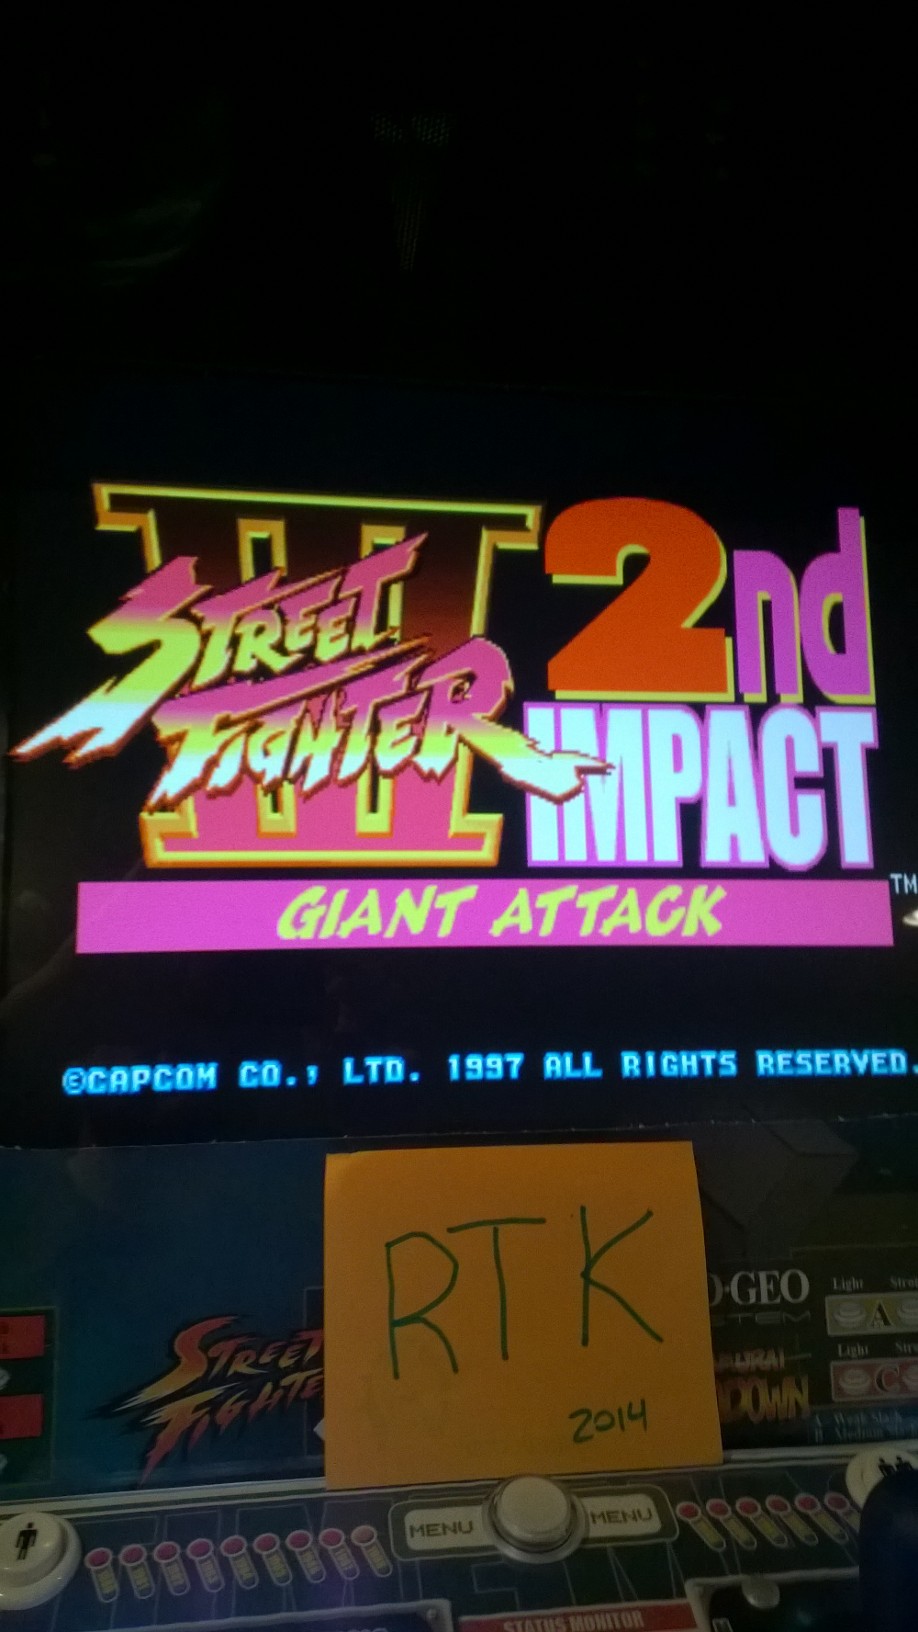 rtkiii: Street Fighter III: 2nd Impact: Giant Attack [sfiii2] (Arcade Emulated / M.A.M.E.) 460,500 points on 2014-05-13 05:44:50